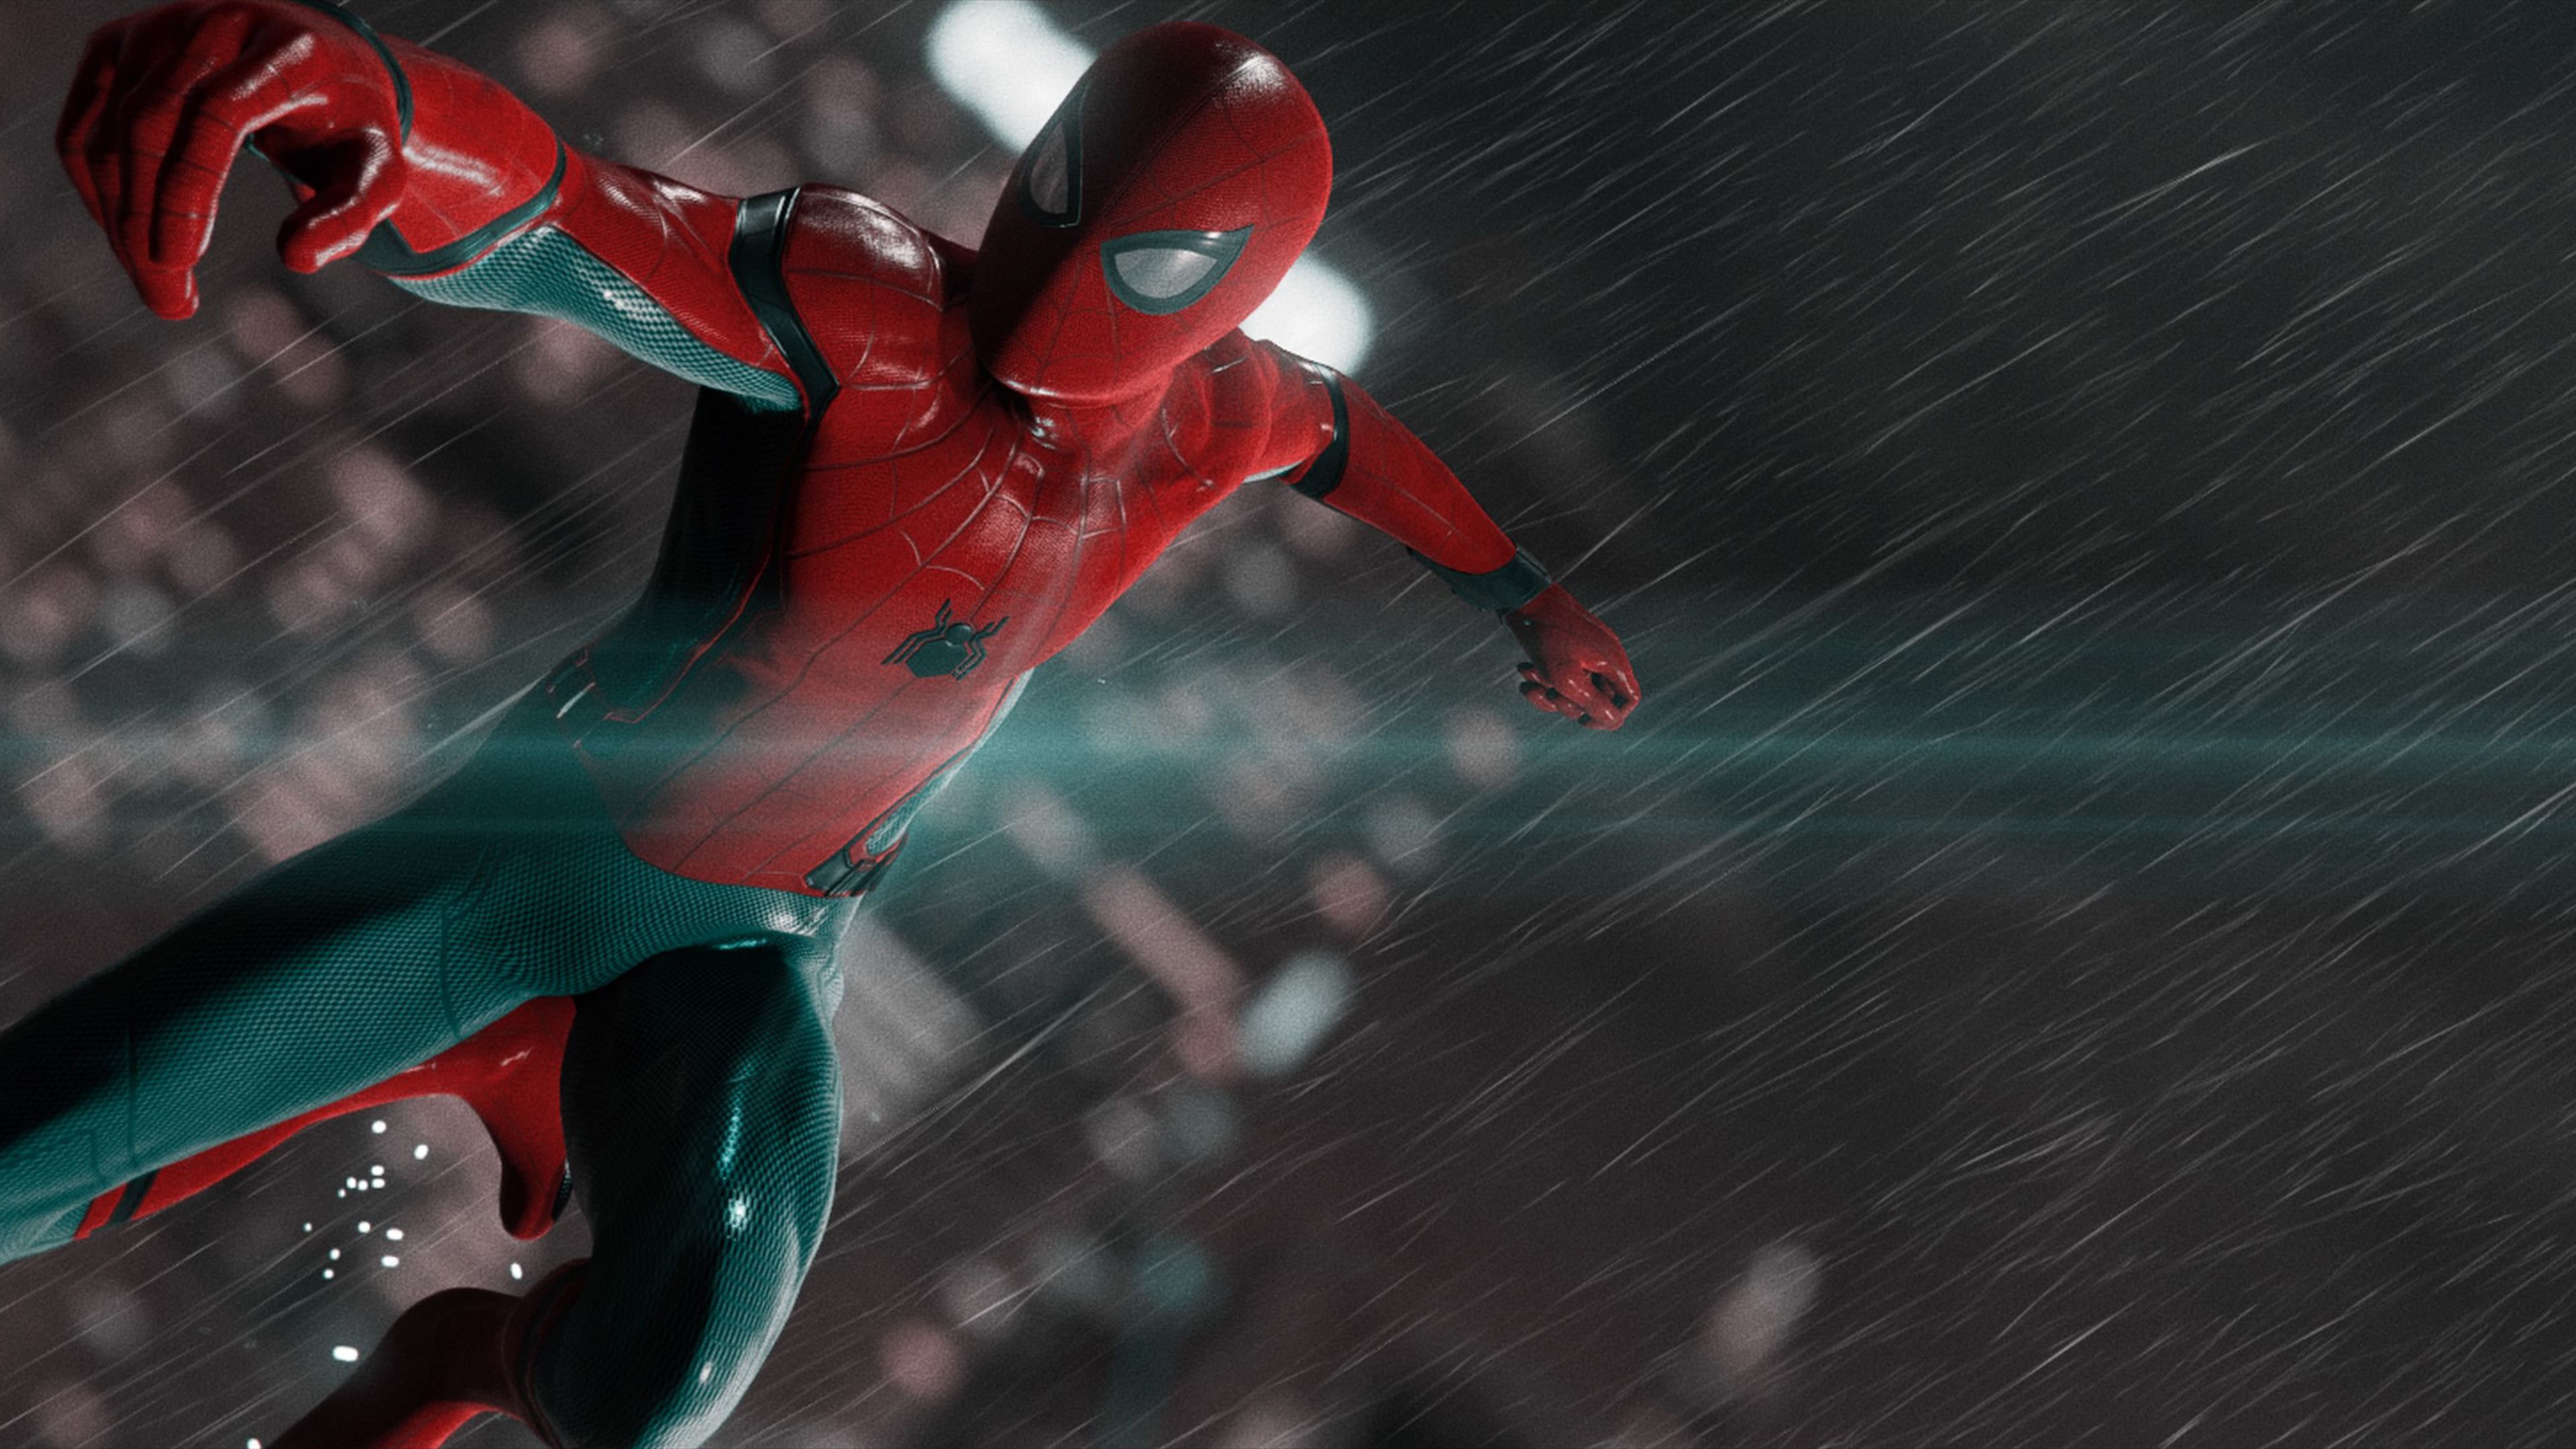 Spider Man Flying In Rain Wallpapers